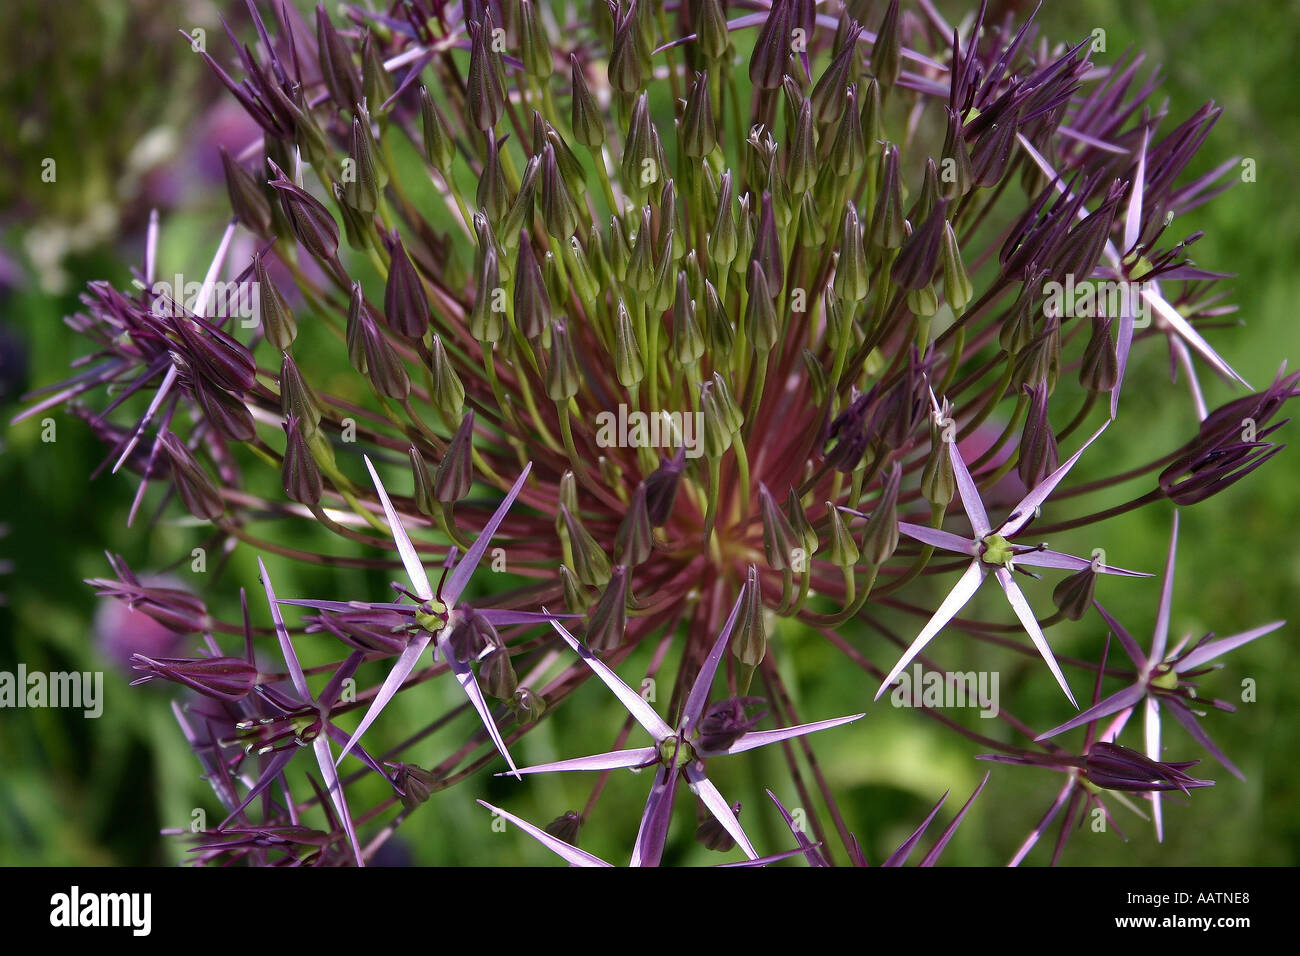 Close up shot of a single flower of an Allium plant Stock Photo